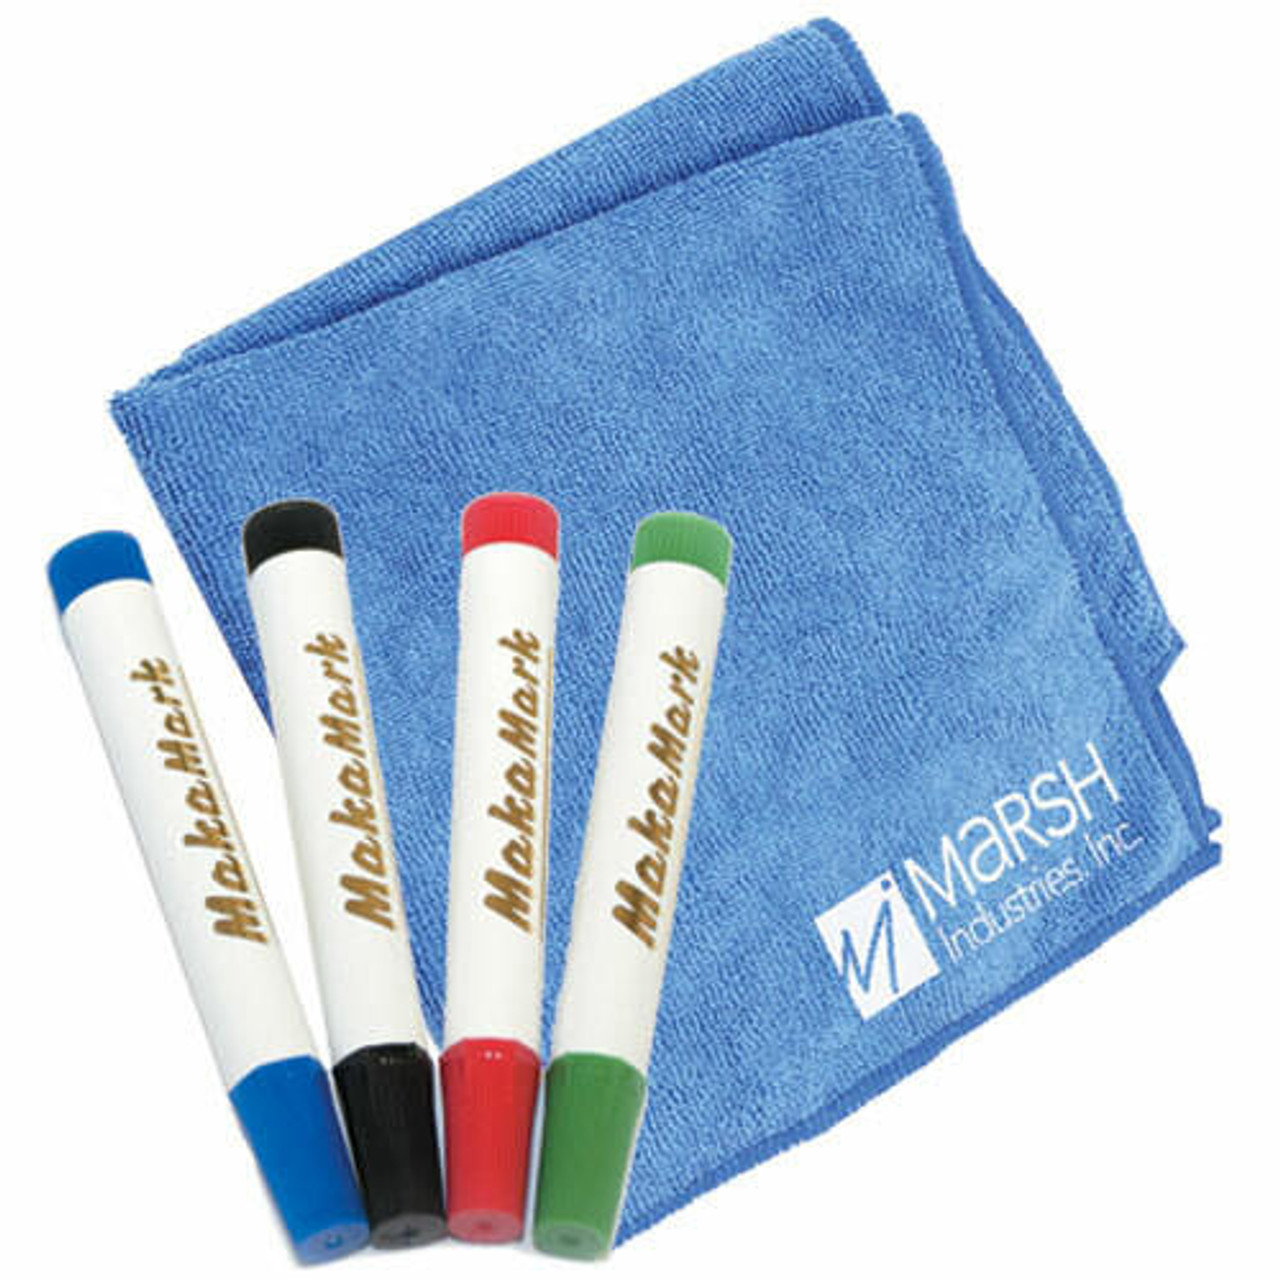 marsh-combo-pack-1-eraser-cloth-and-4-colored-markers/